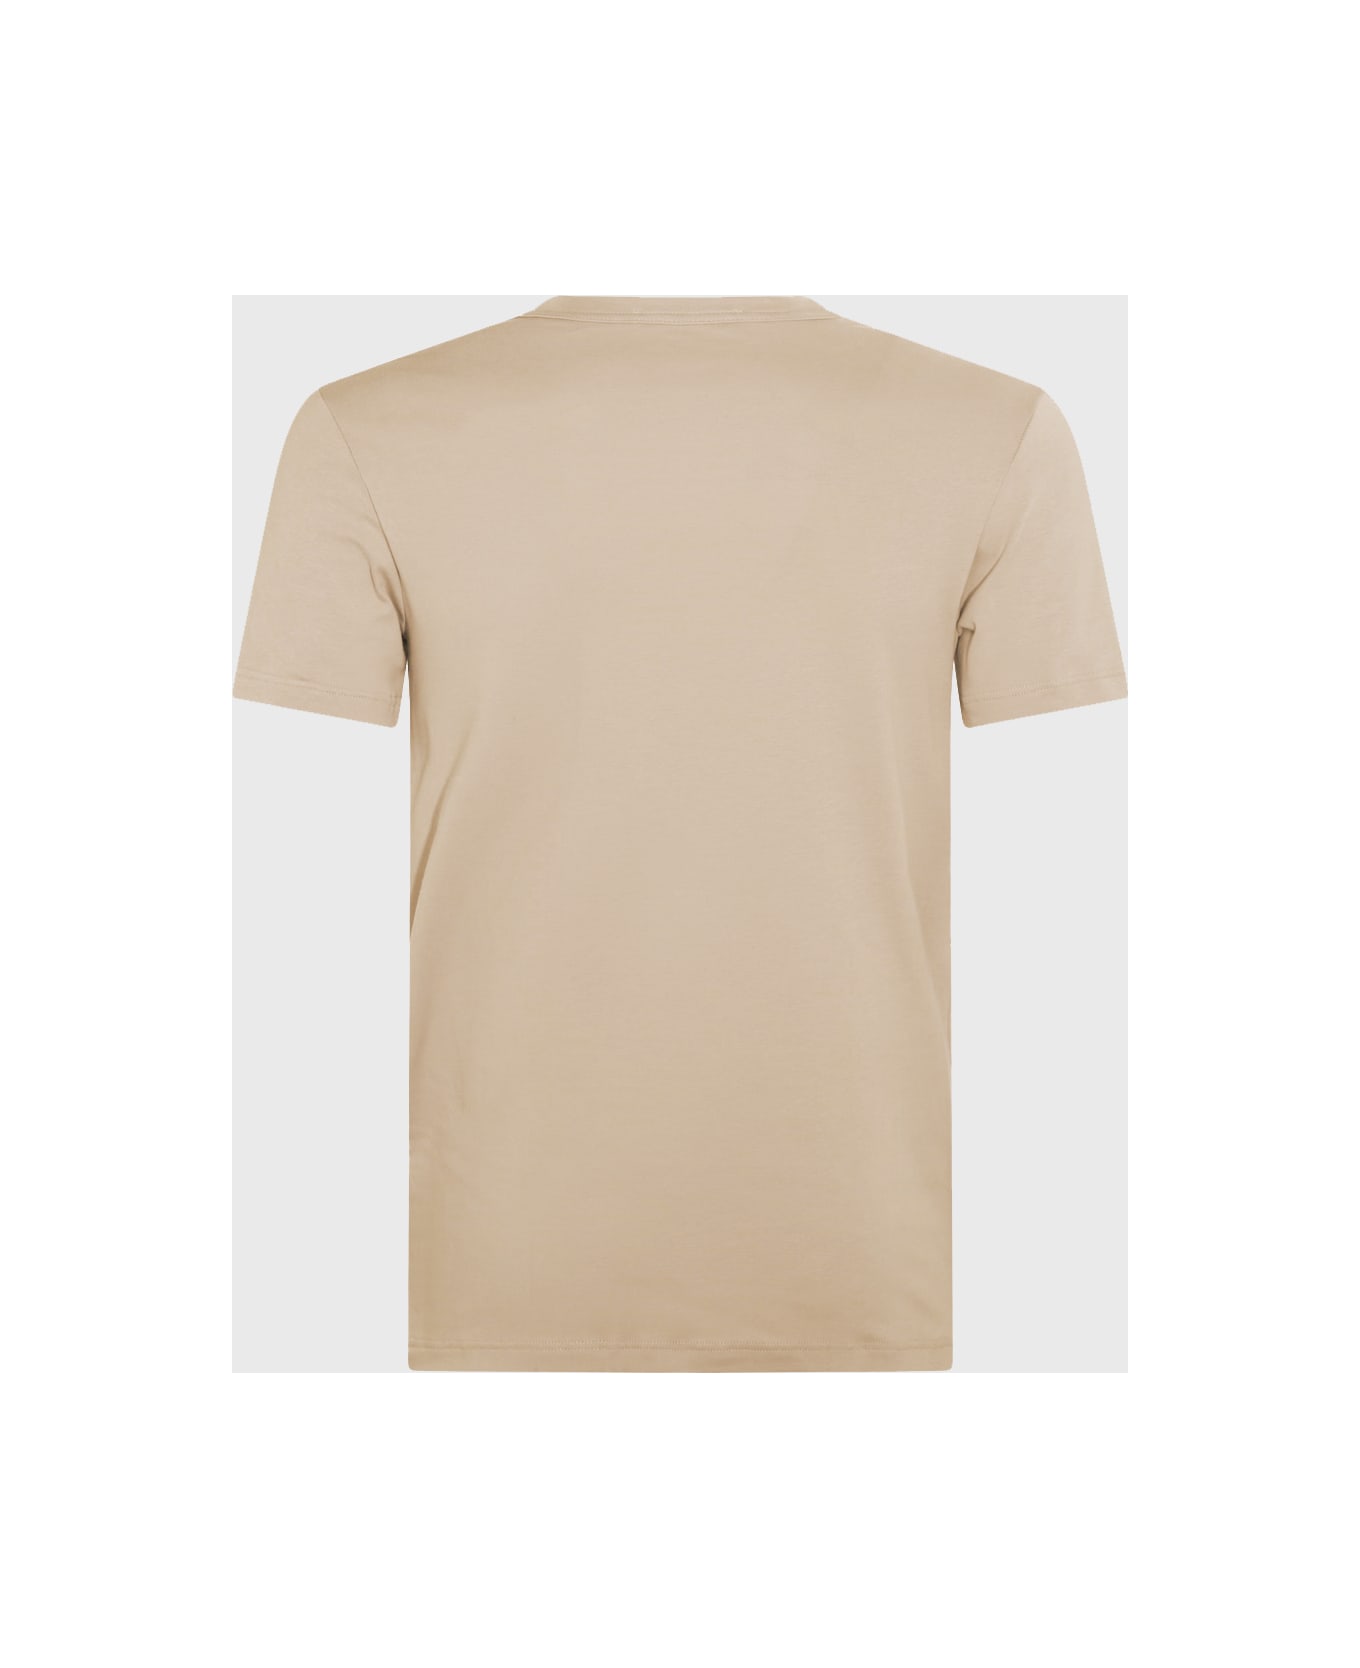 Tom Ford Beige Cotton Blend T-shirt - NUDE 1